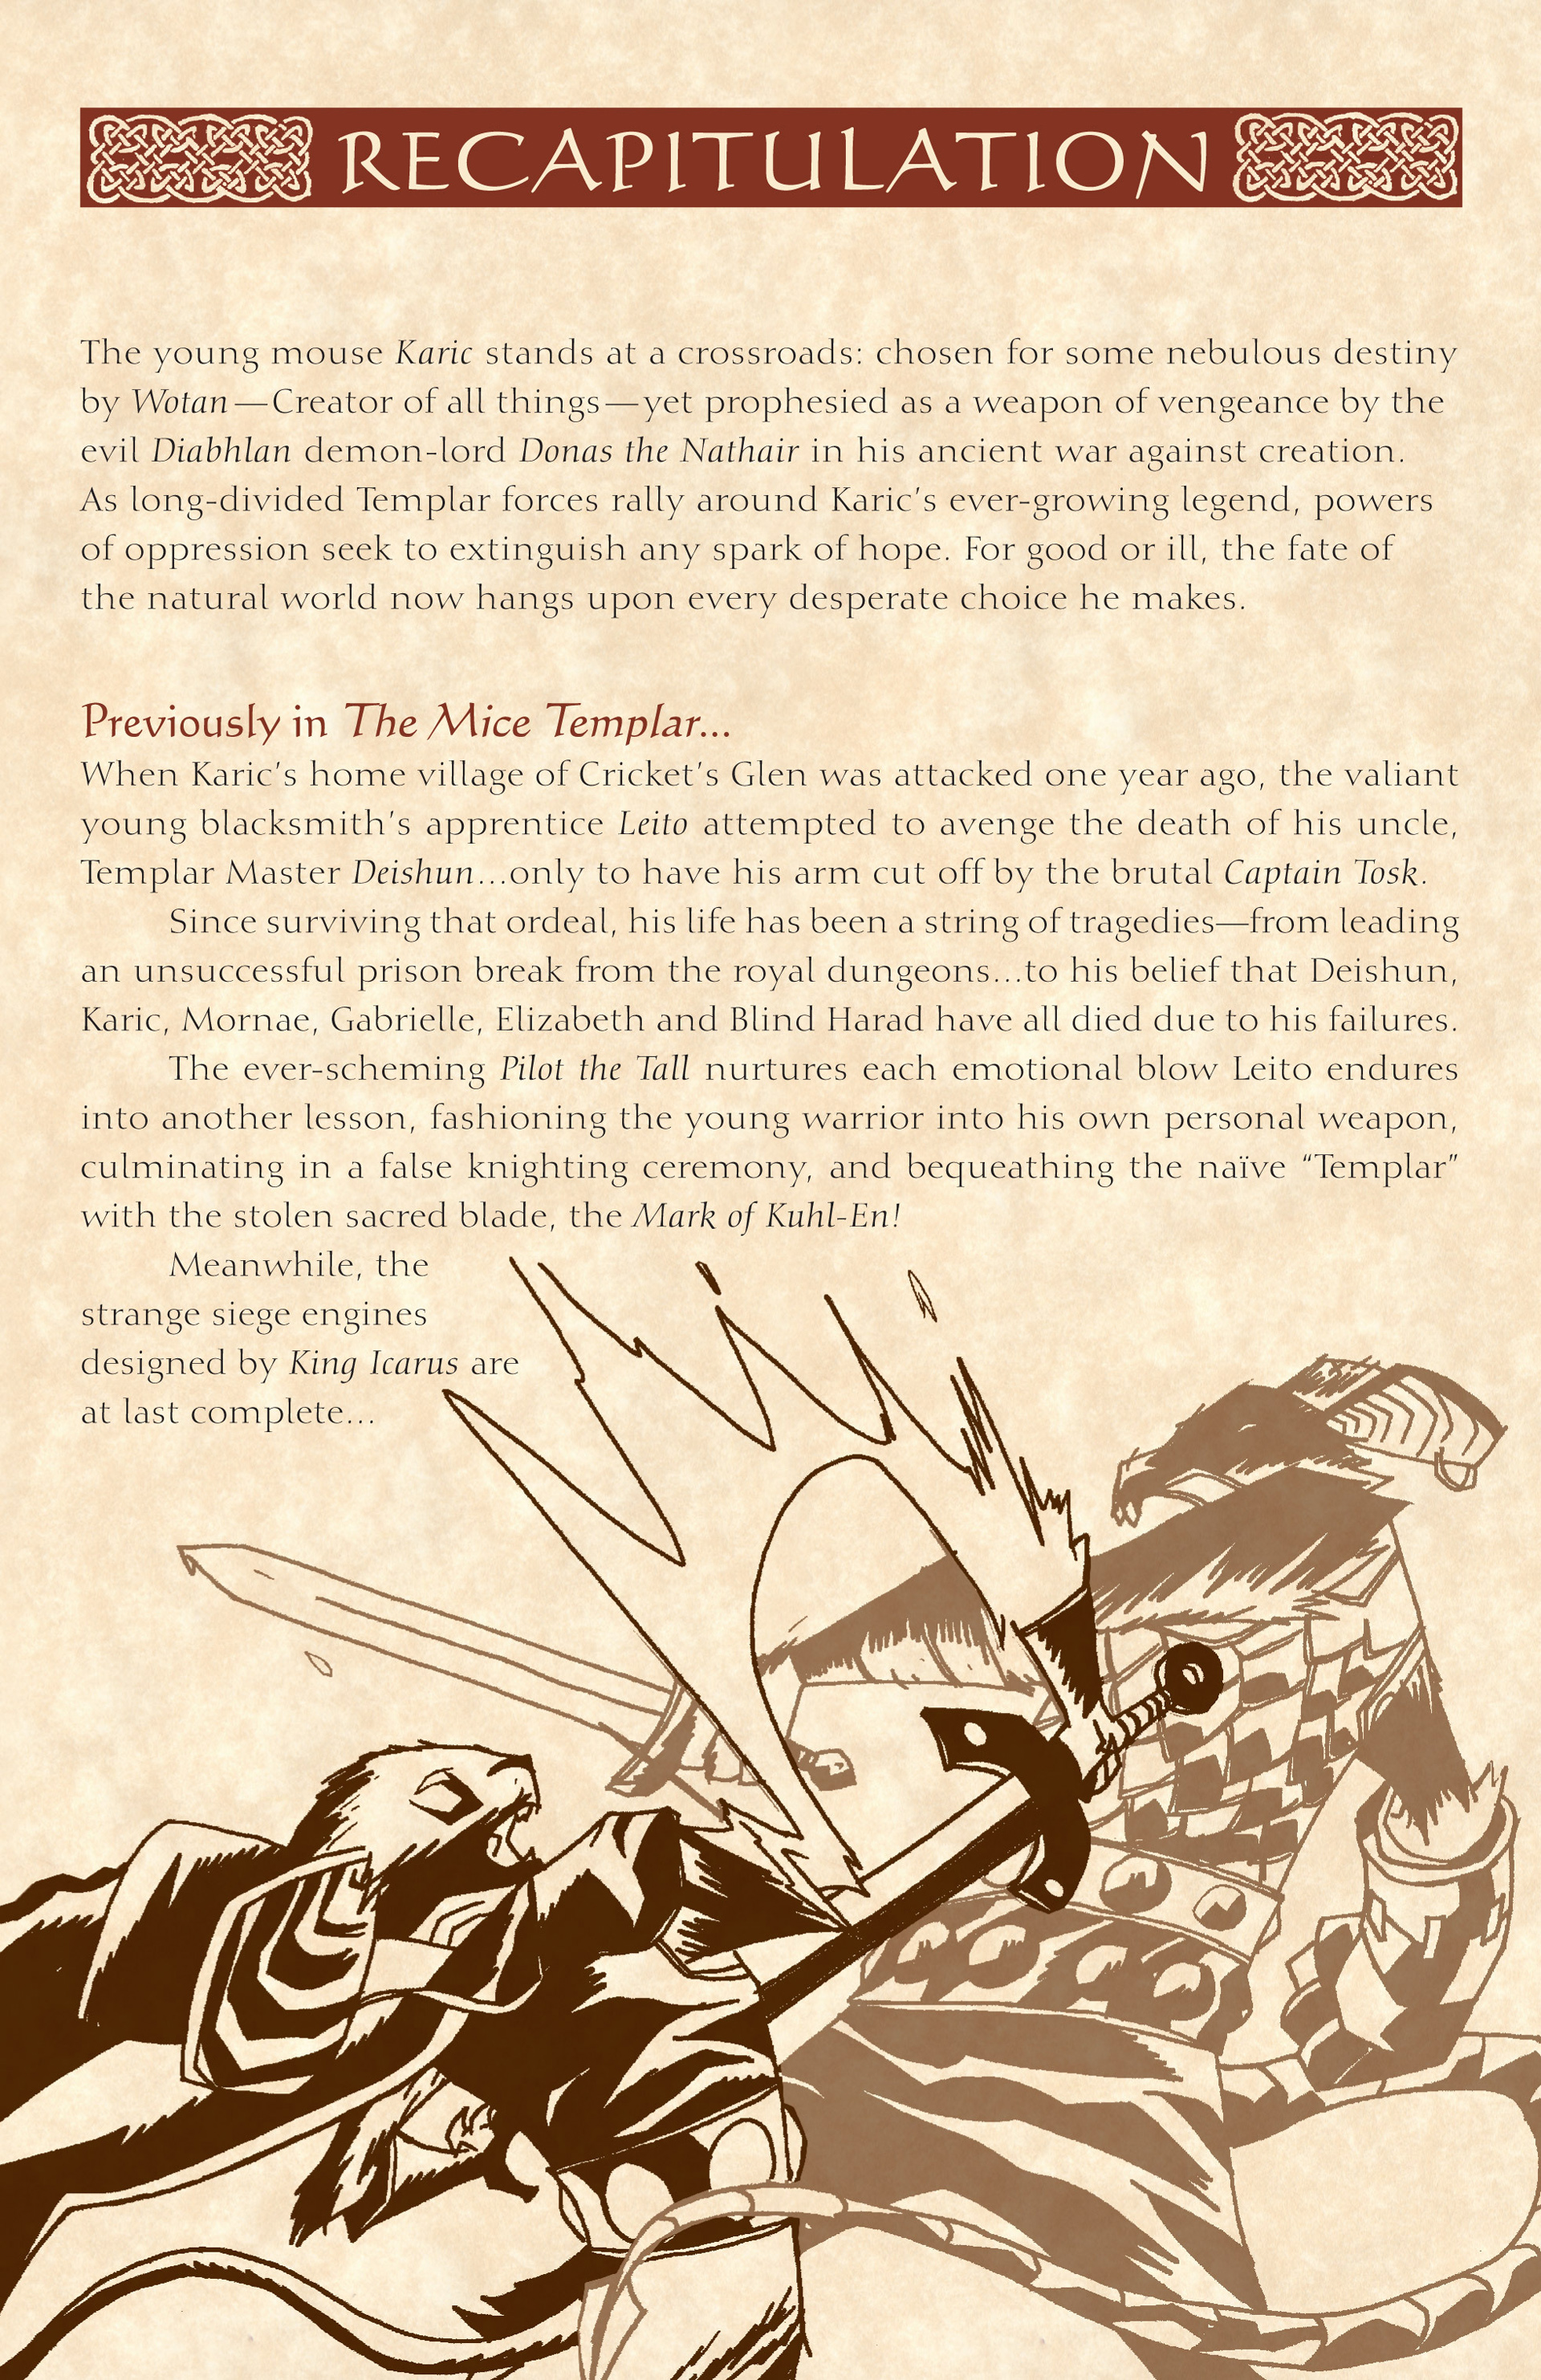 The Mice Templar Volume 4: Legend issue 7 - Page 3